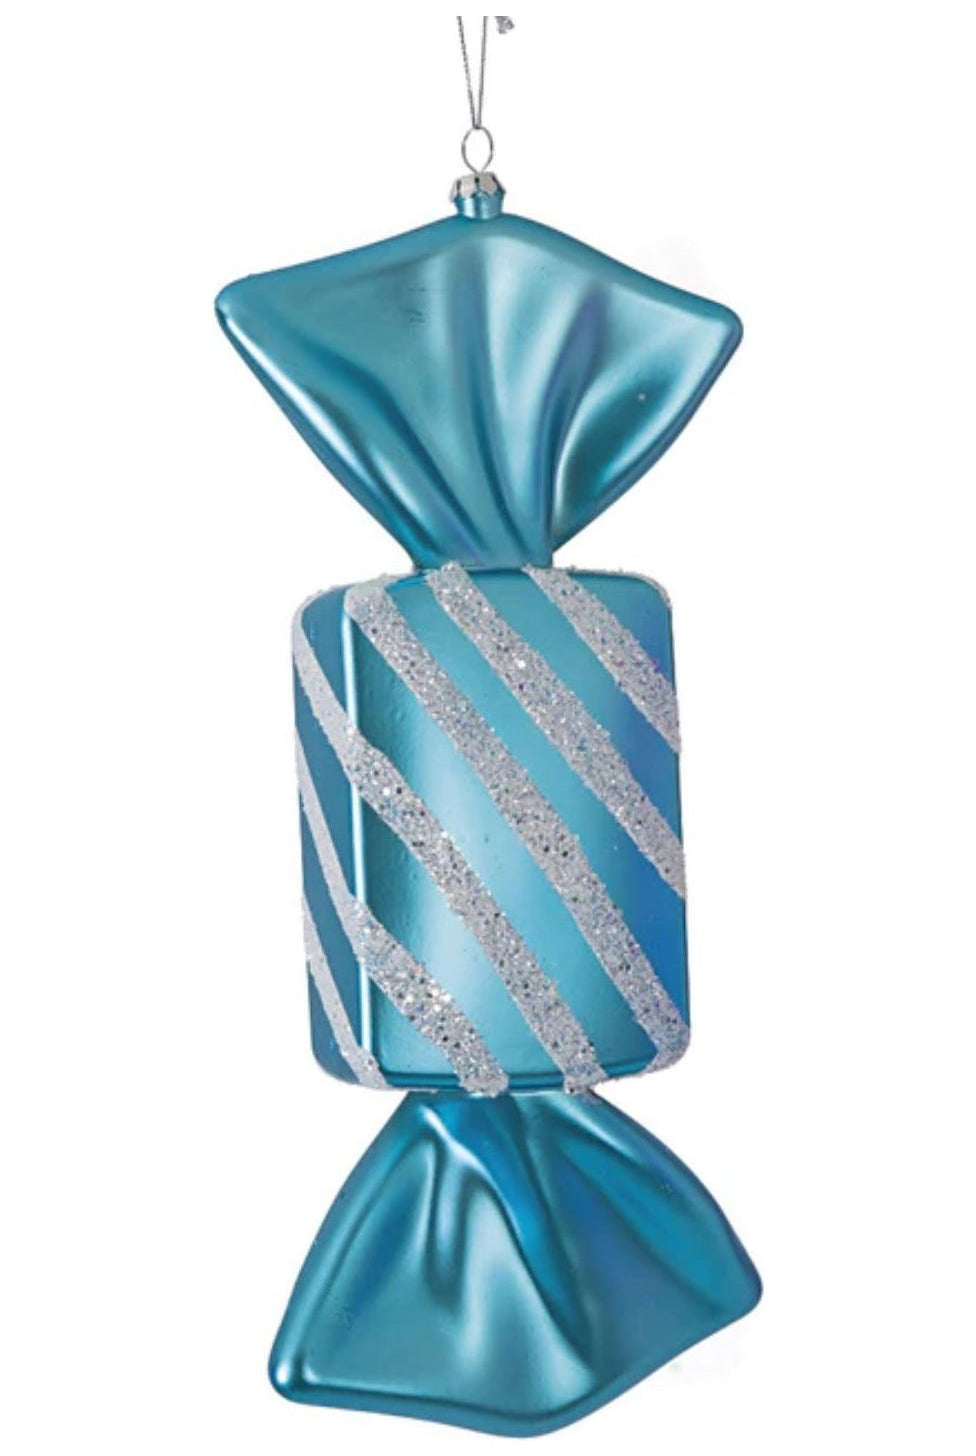 12" Striped Candy Ornament (Teal) - Michelle's aDOORable Creations - Holiday Ornaments